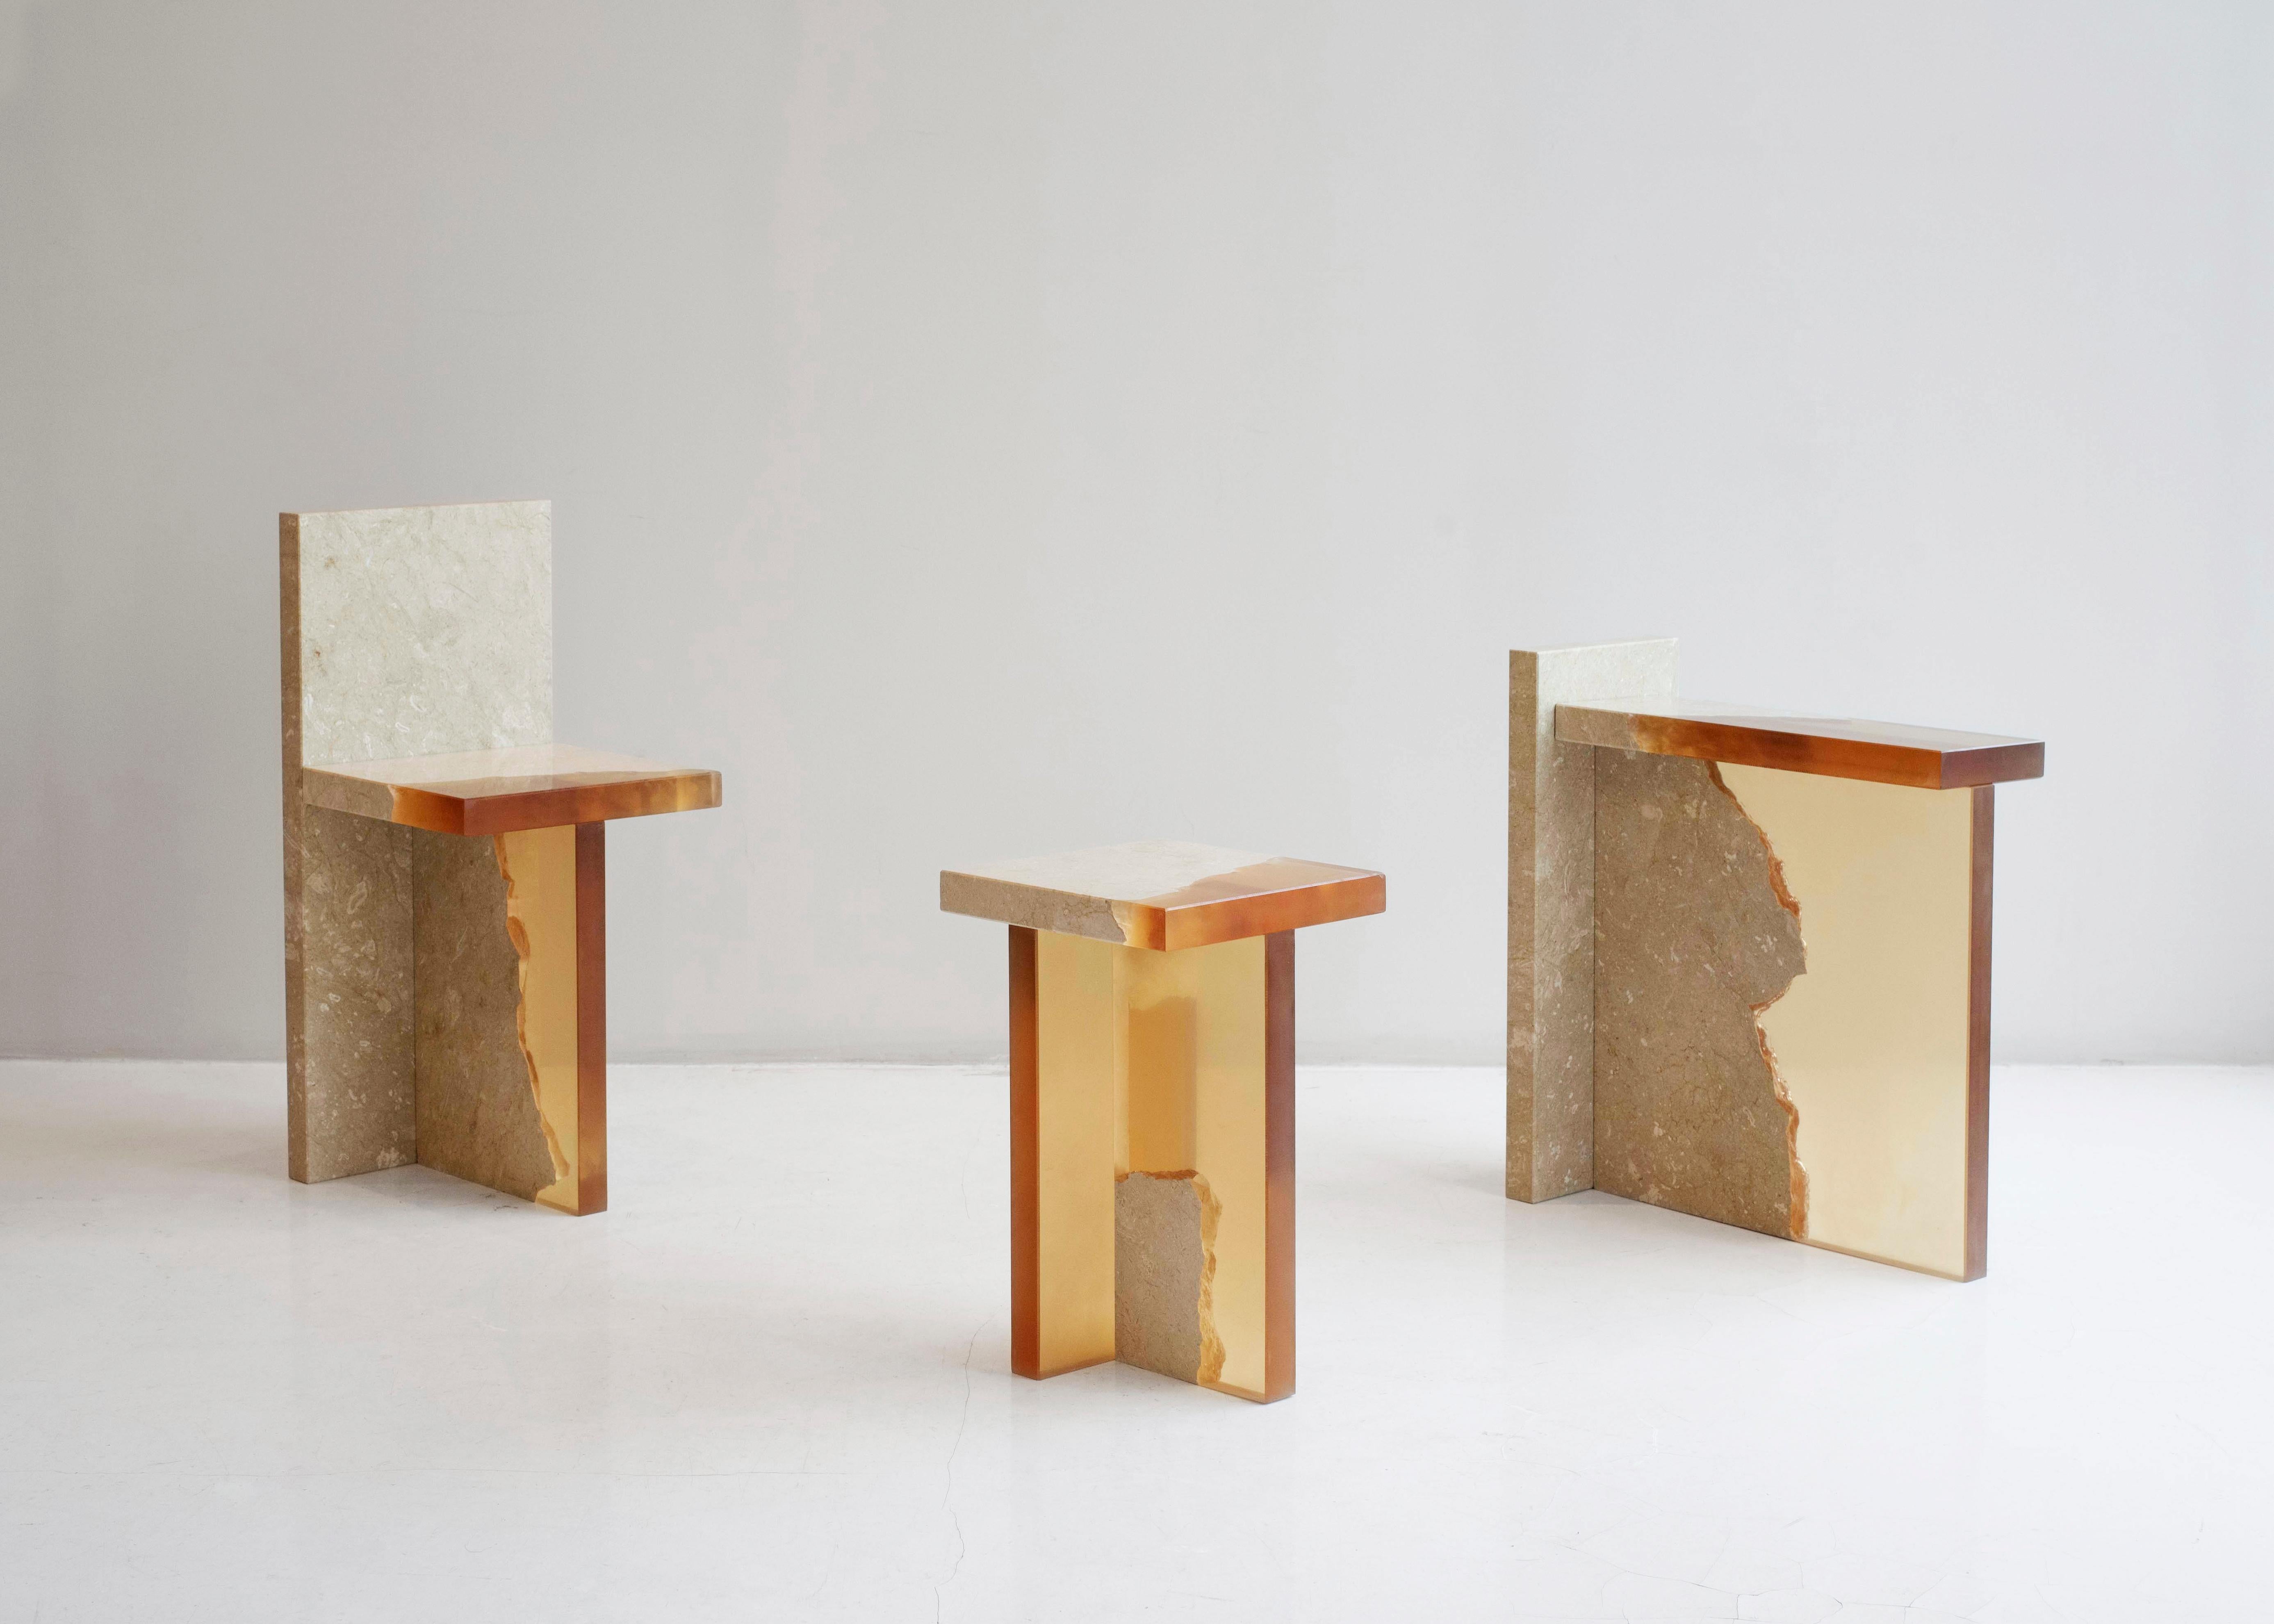 Crystal Resin and Marble Fragment Side Table by Jang Hea Kyoung
Artist: Jang Hea Kyoung
Materials: Crystal Resin and Marble
Dimensions: 52 x 24 x 60 cm

Jang Hea Kyoung is based in Seoul, Republic of Korea. She searches for Craft elements and makes